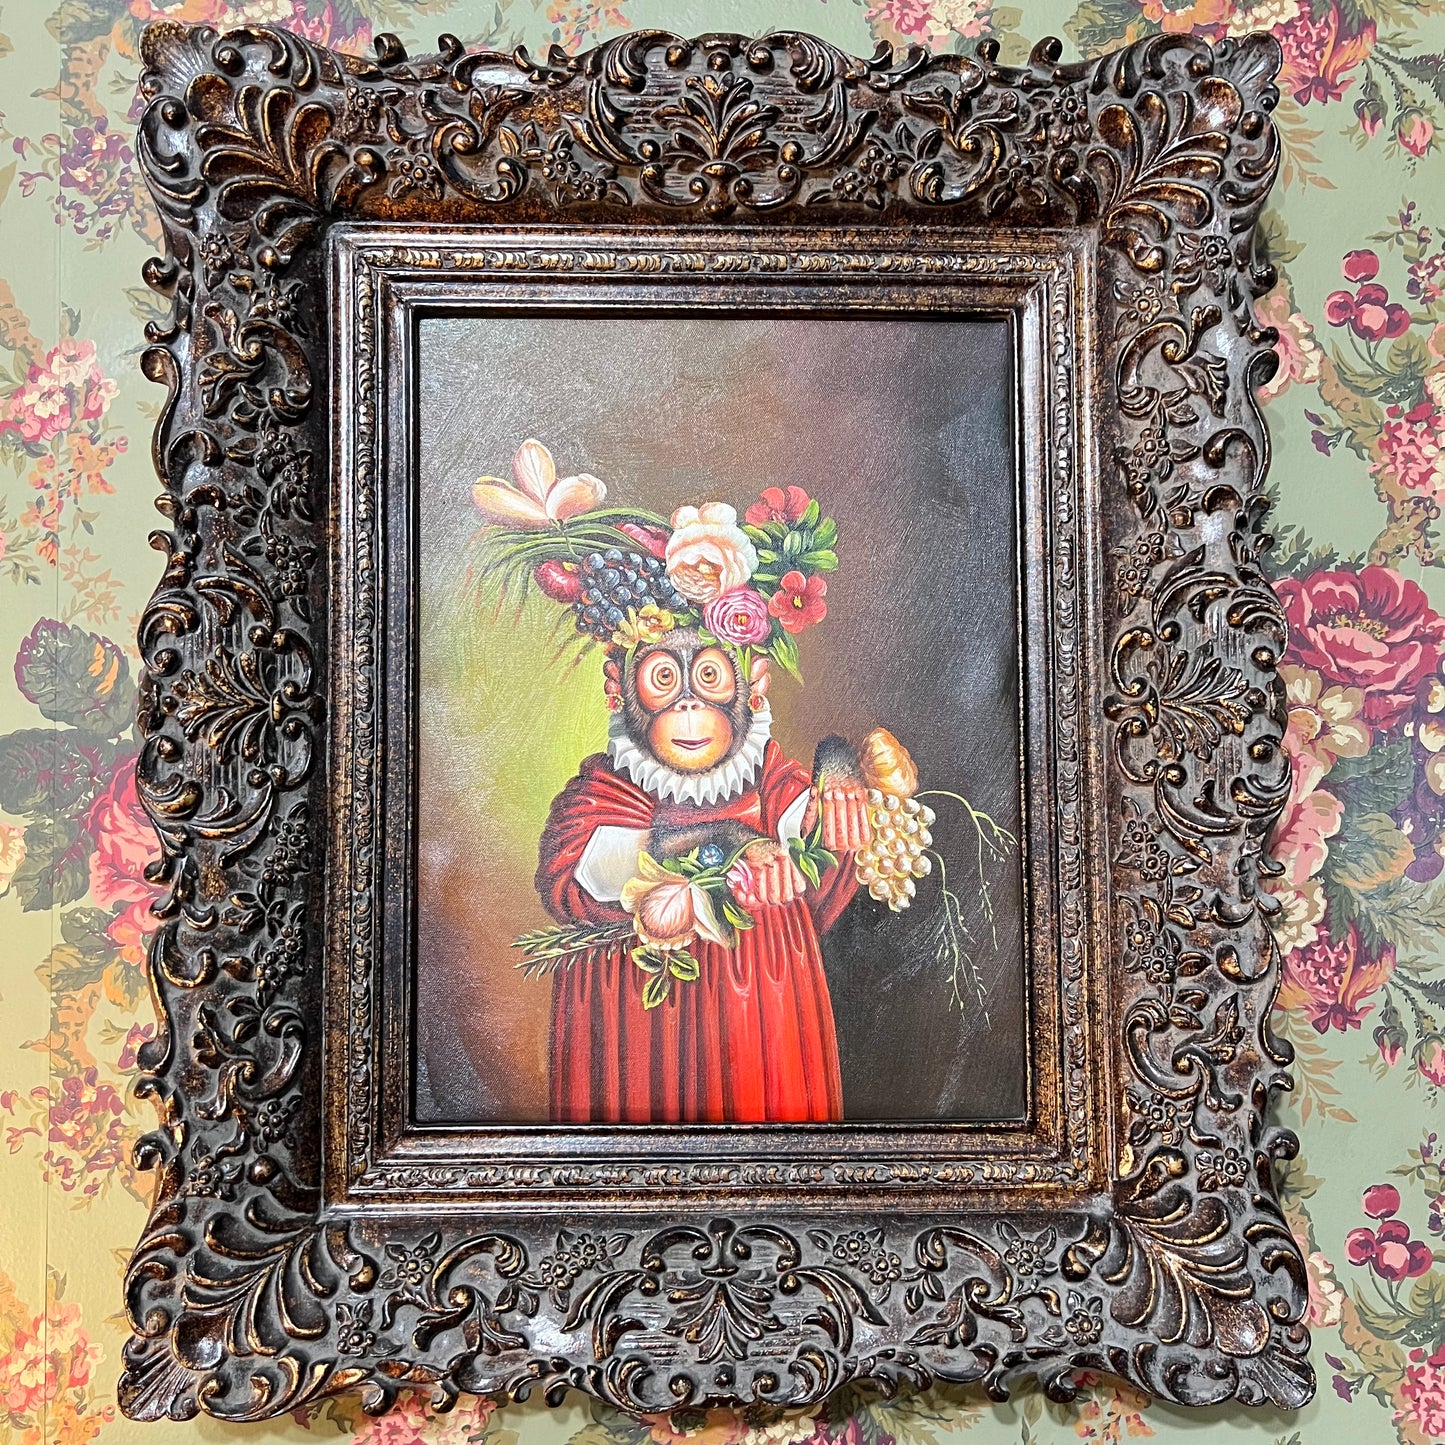 Gorgeous Monkey Painting with Ornate Wooden Frame 24.5x20.5